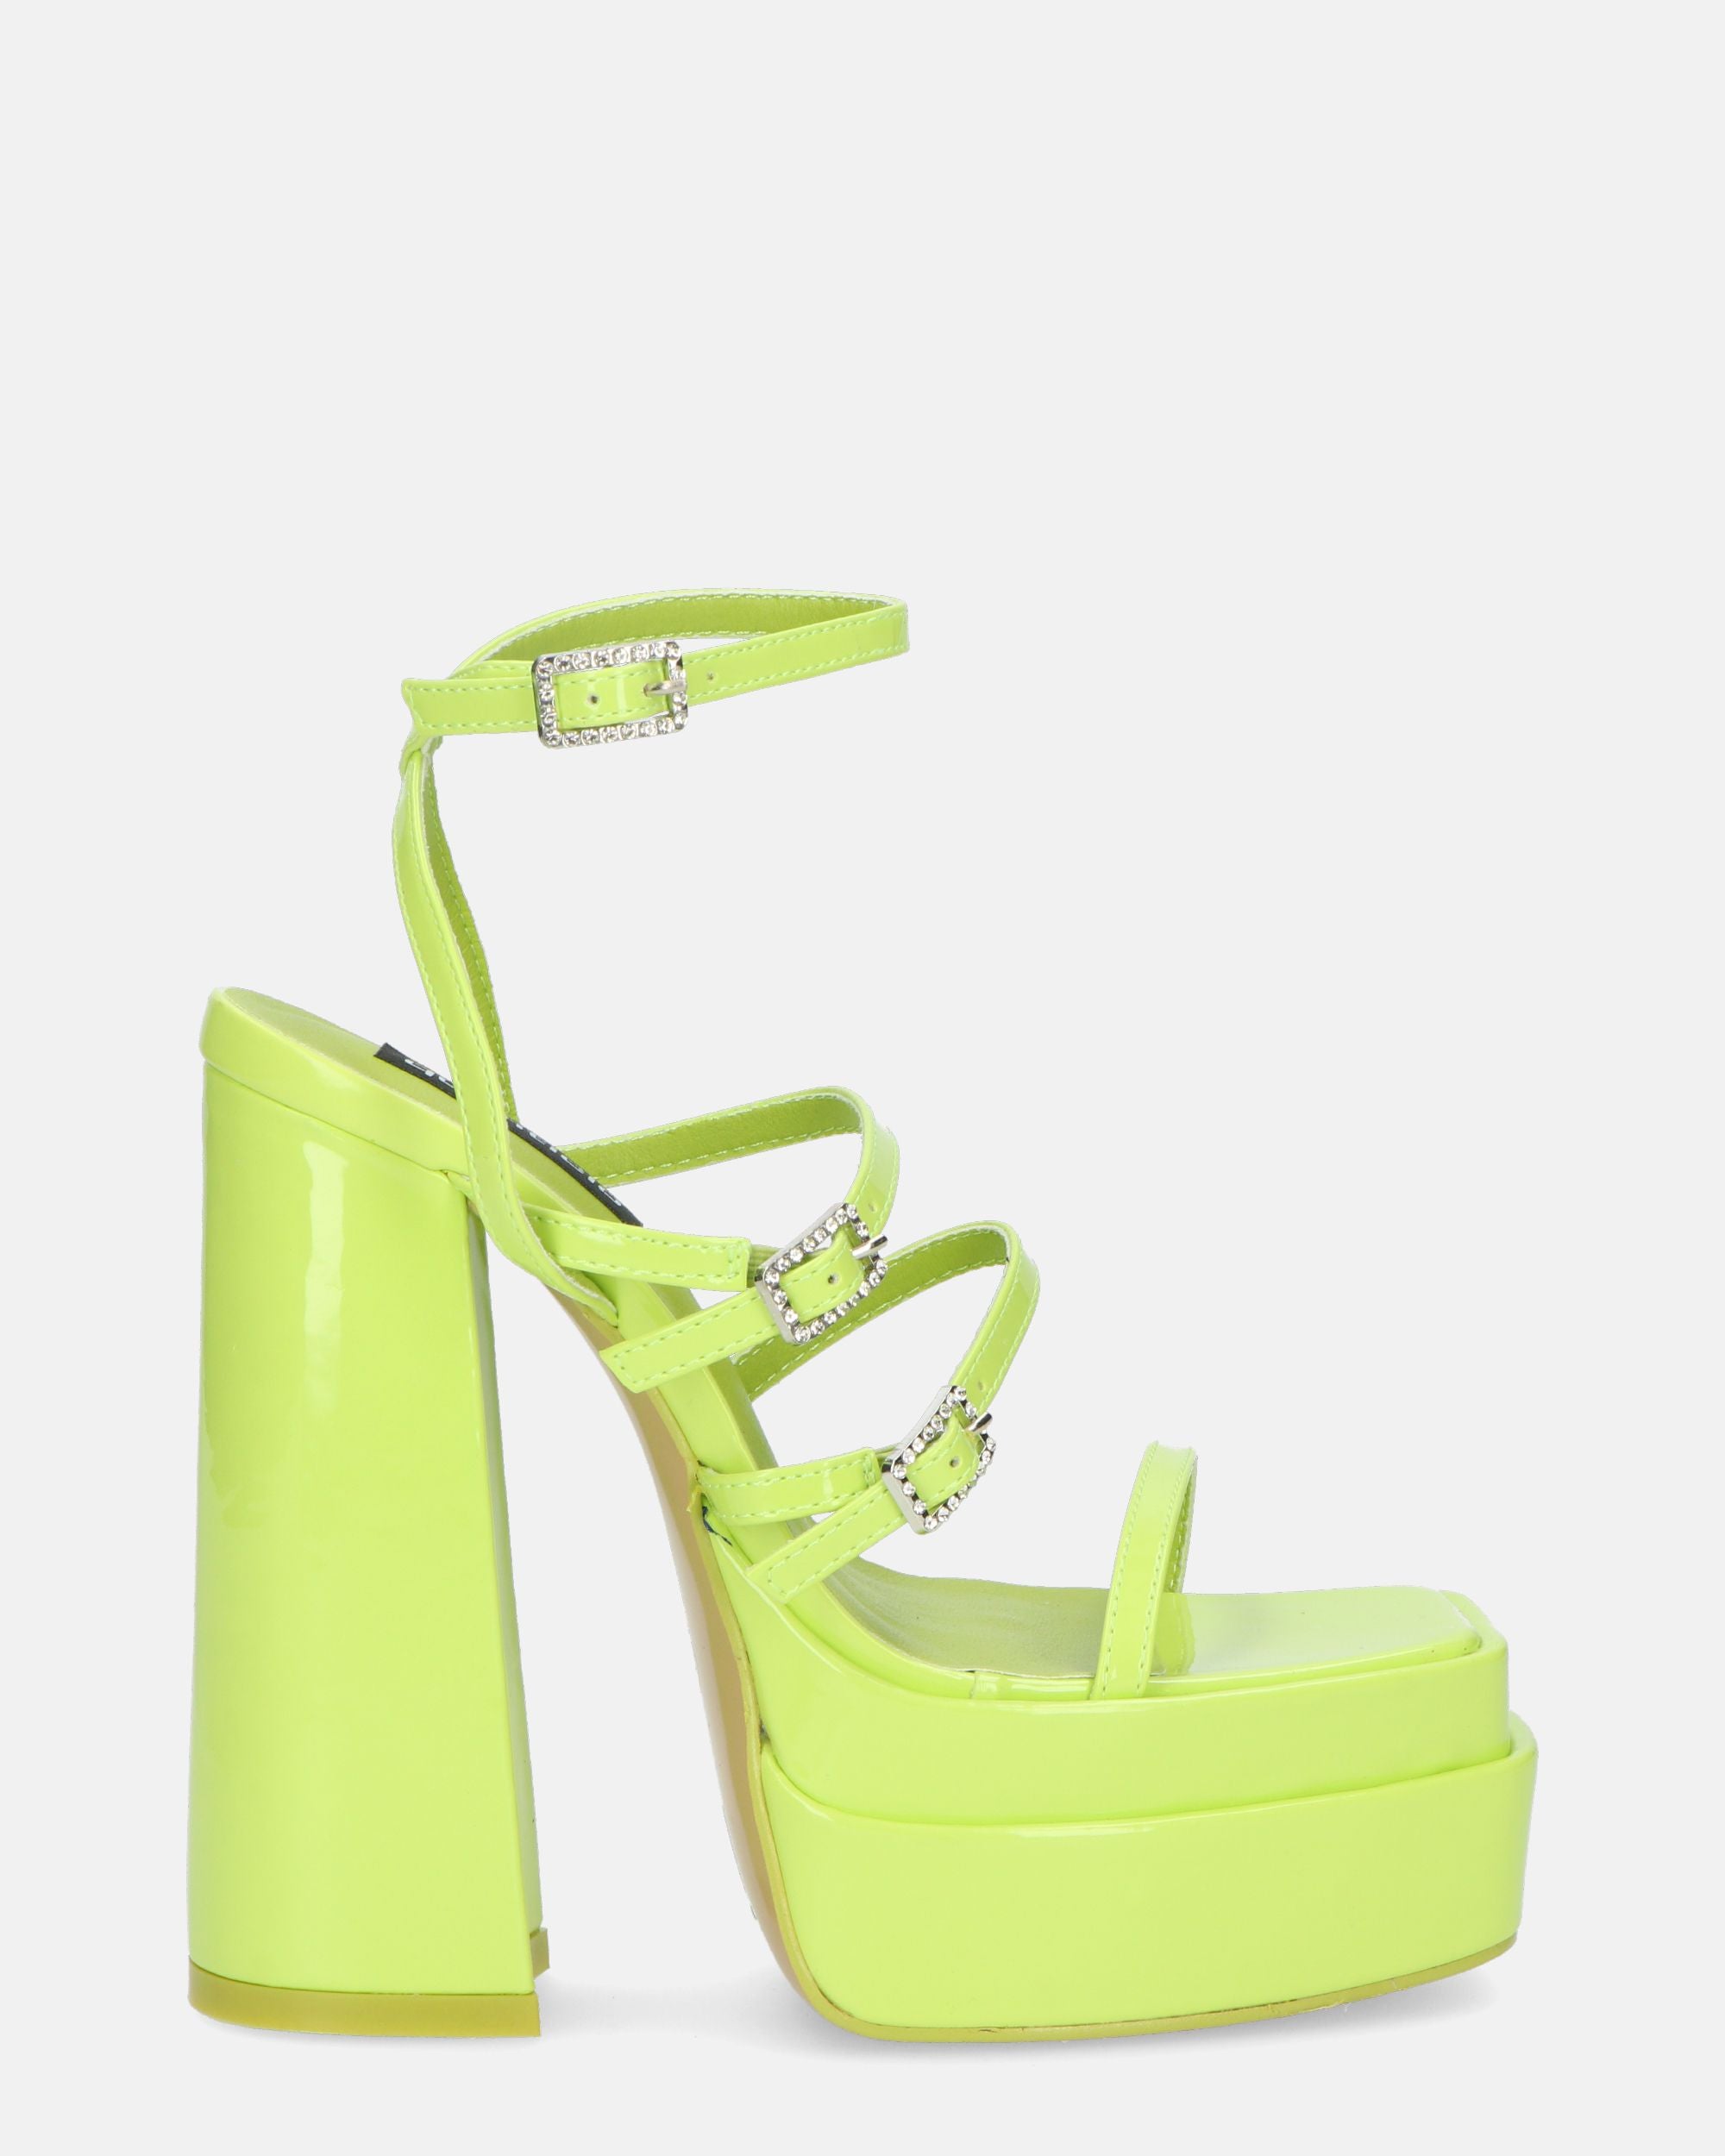 TEXA - sandals with strap and high heel in apple green